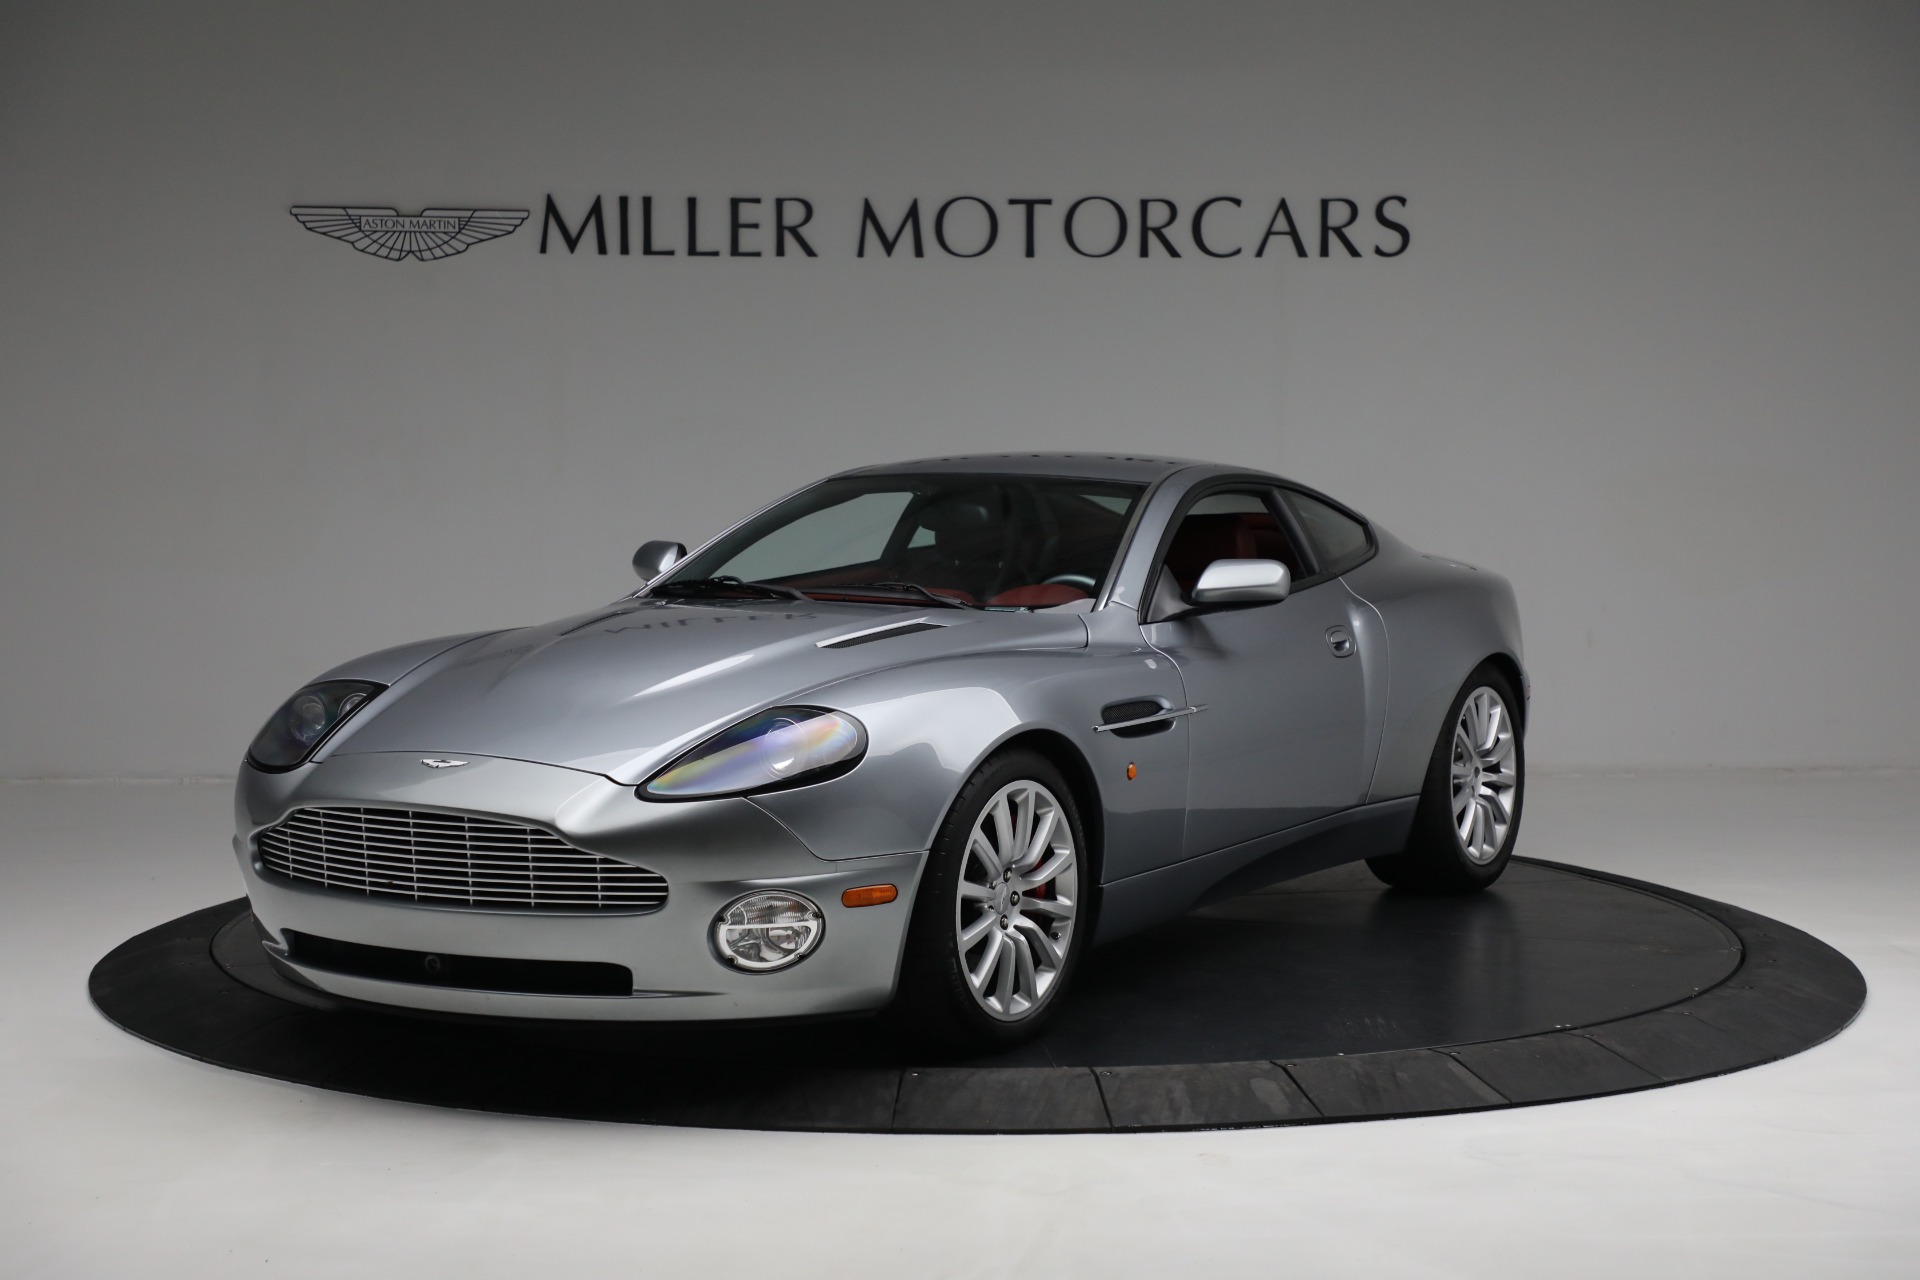 Used 2003 Aston Martin V12 Vanquish for sale Sold at Aston Martin of Greenwich in Greenwich CT 06830 1